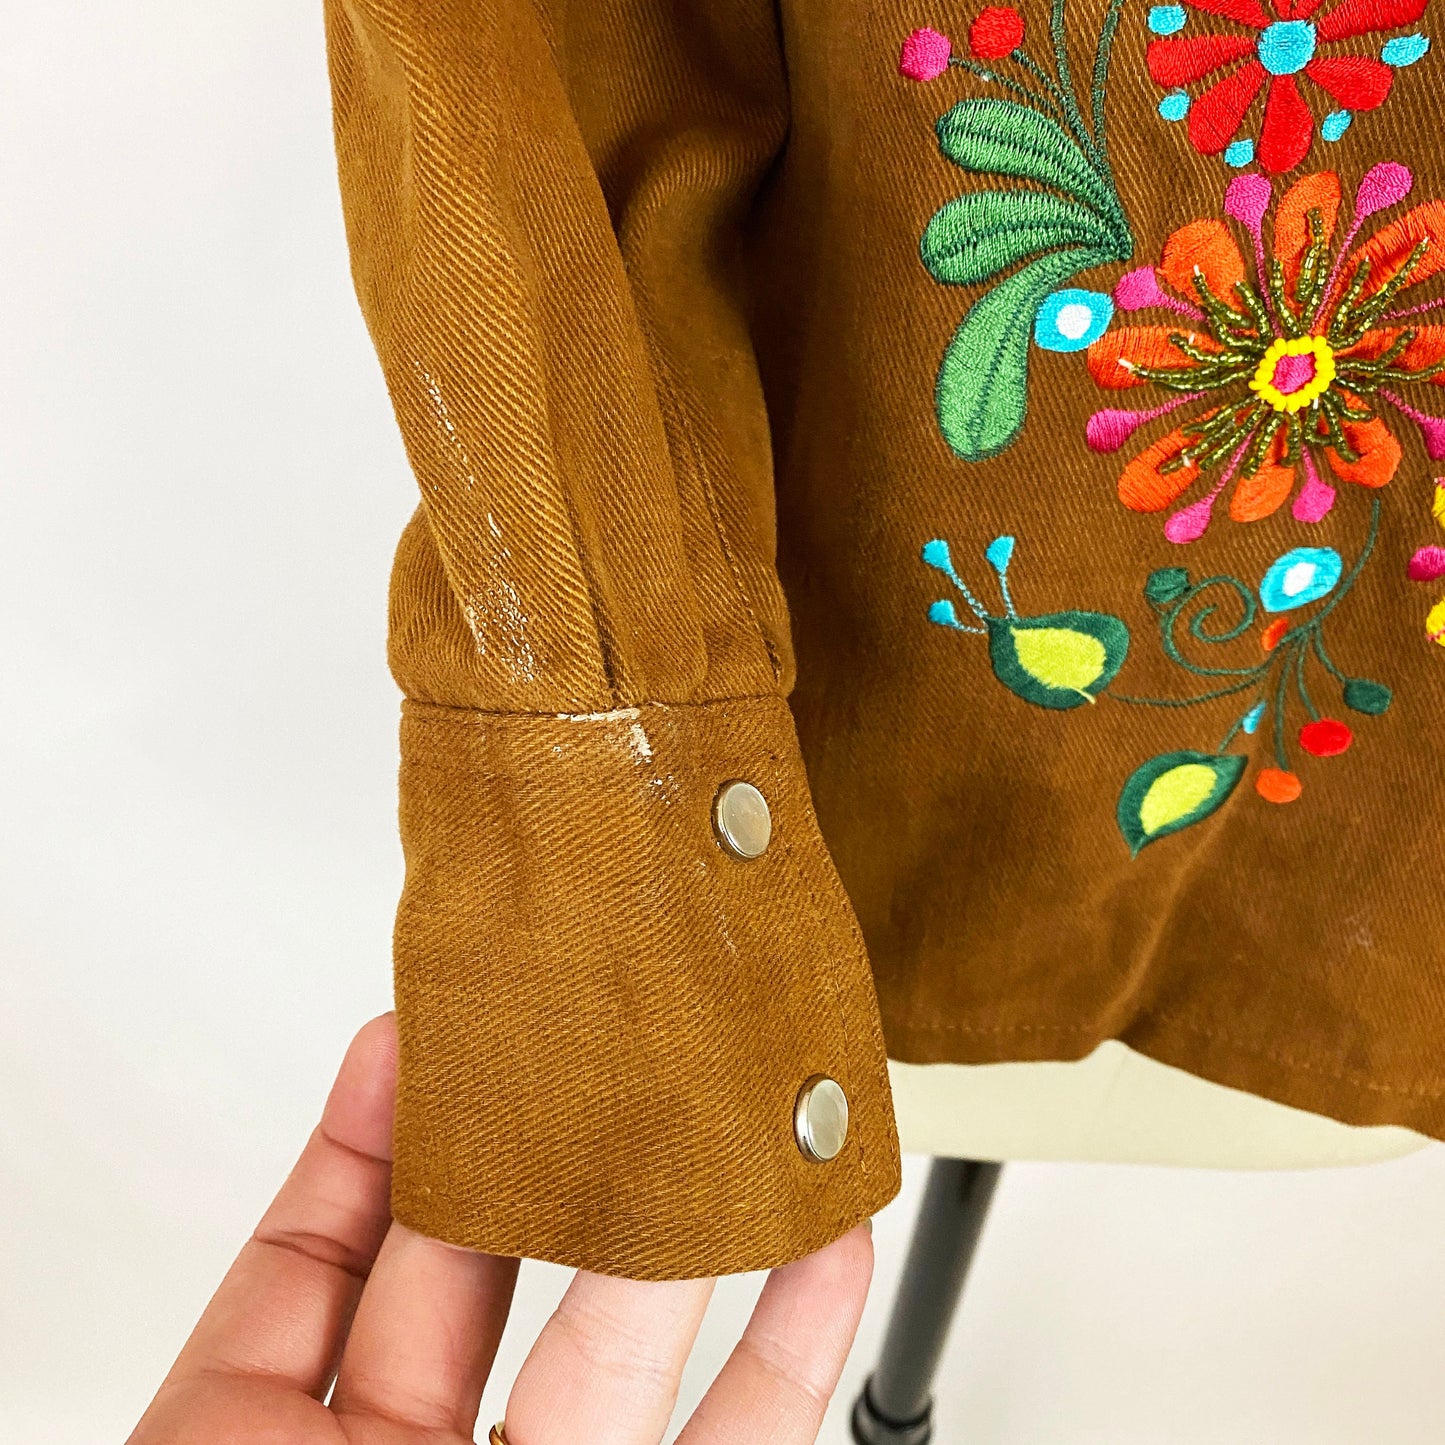 1970's Flower Power Embroidered Brown Cotton Jacket and High Waisted B –  Birds and Skylines Vintage